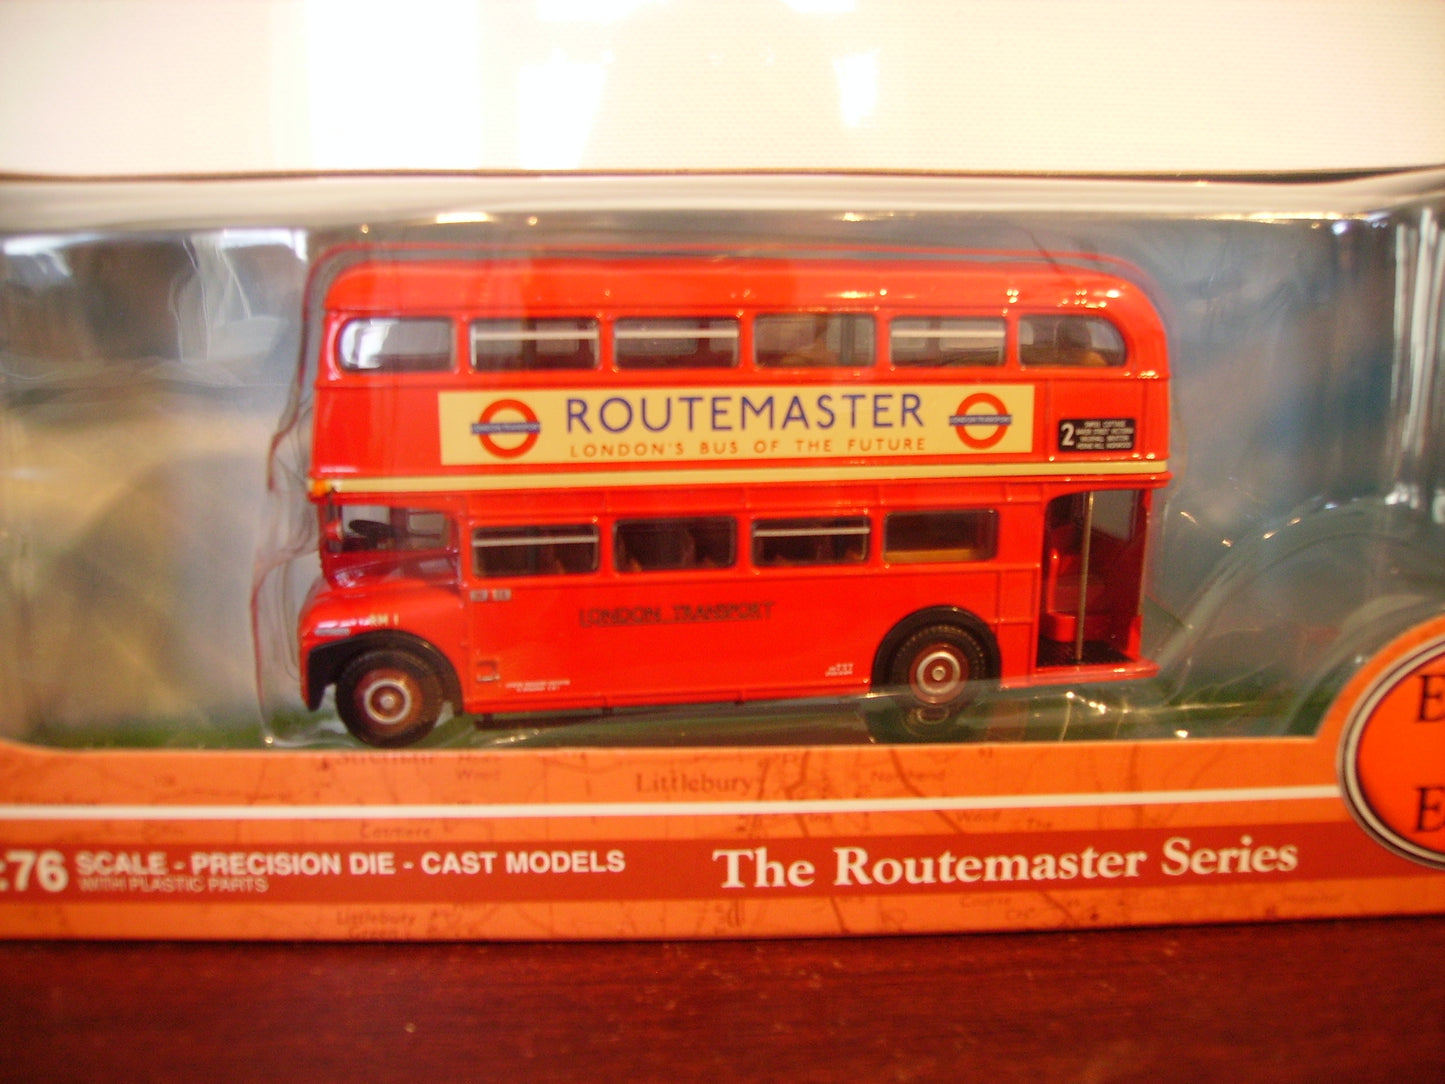 31601 RM1 Routemaster "London Transport" Route 2